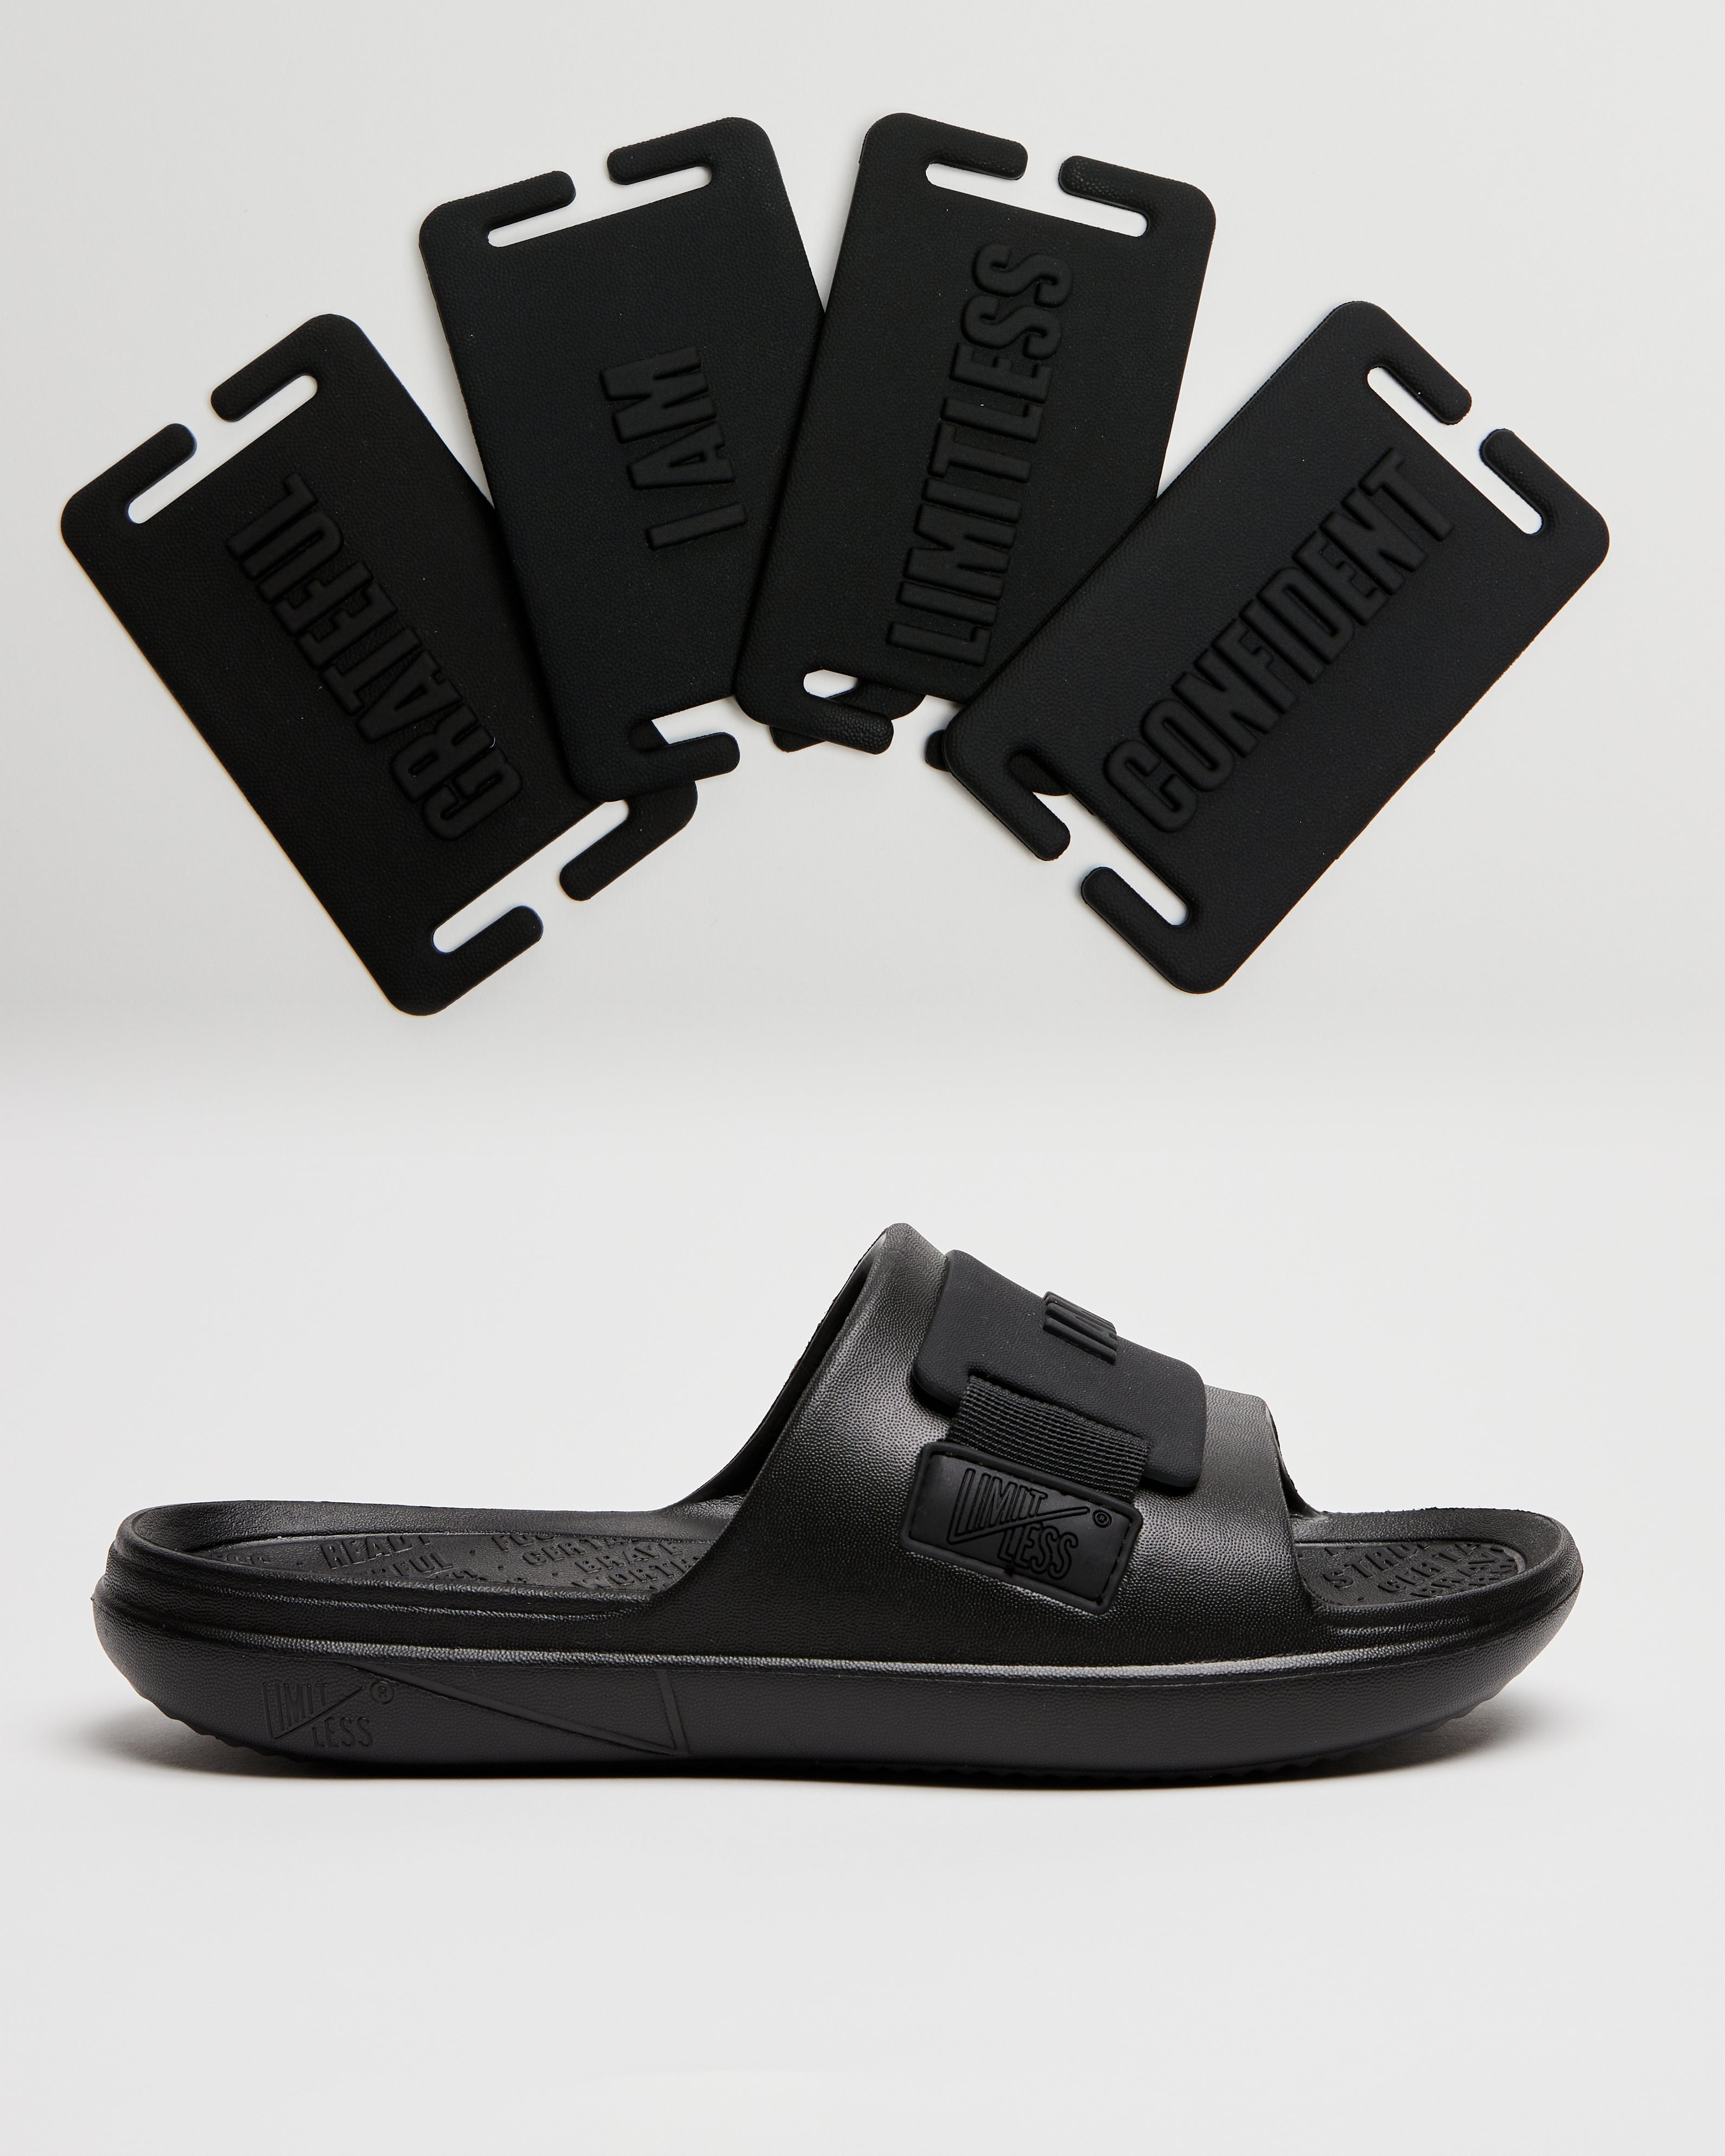 LIMITLESS SLIDES™ WITH ESSENTIAL TIBAH™ QUAD - FOSSIL RIDGE HIGH SCHOOL EDITION